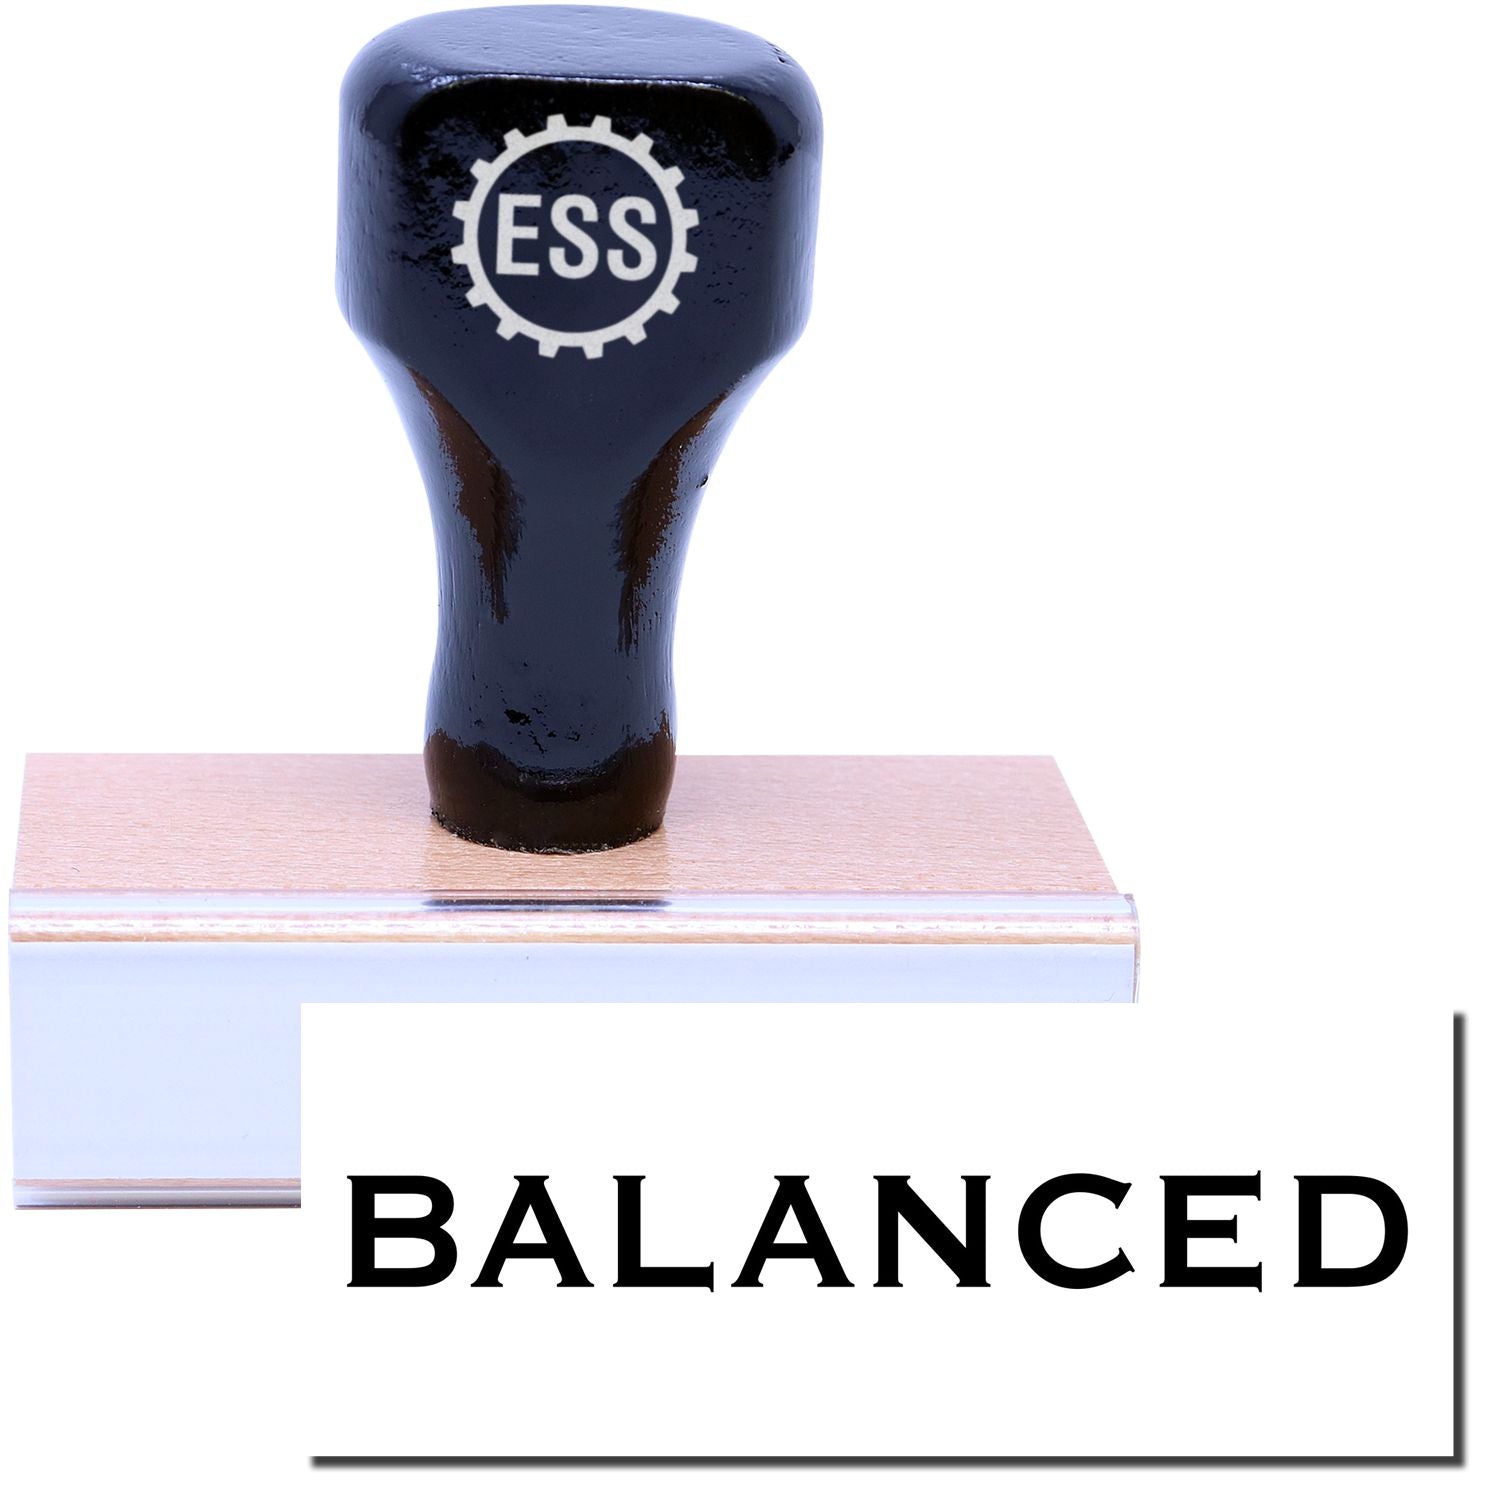 A stock office rubber stamp with a stamped image showing how the text "BALANCED" is displayed after stamping.